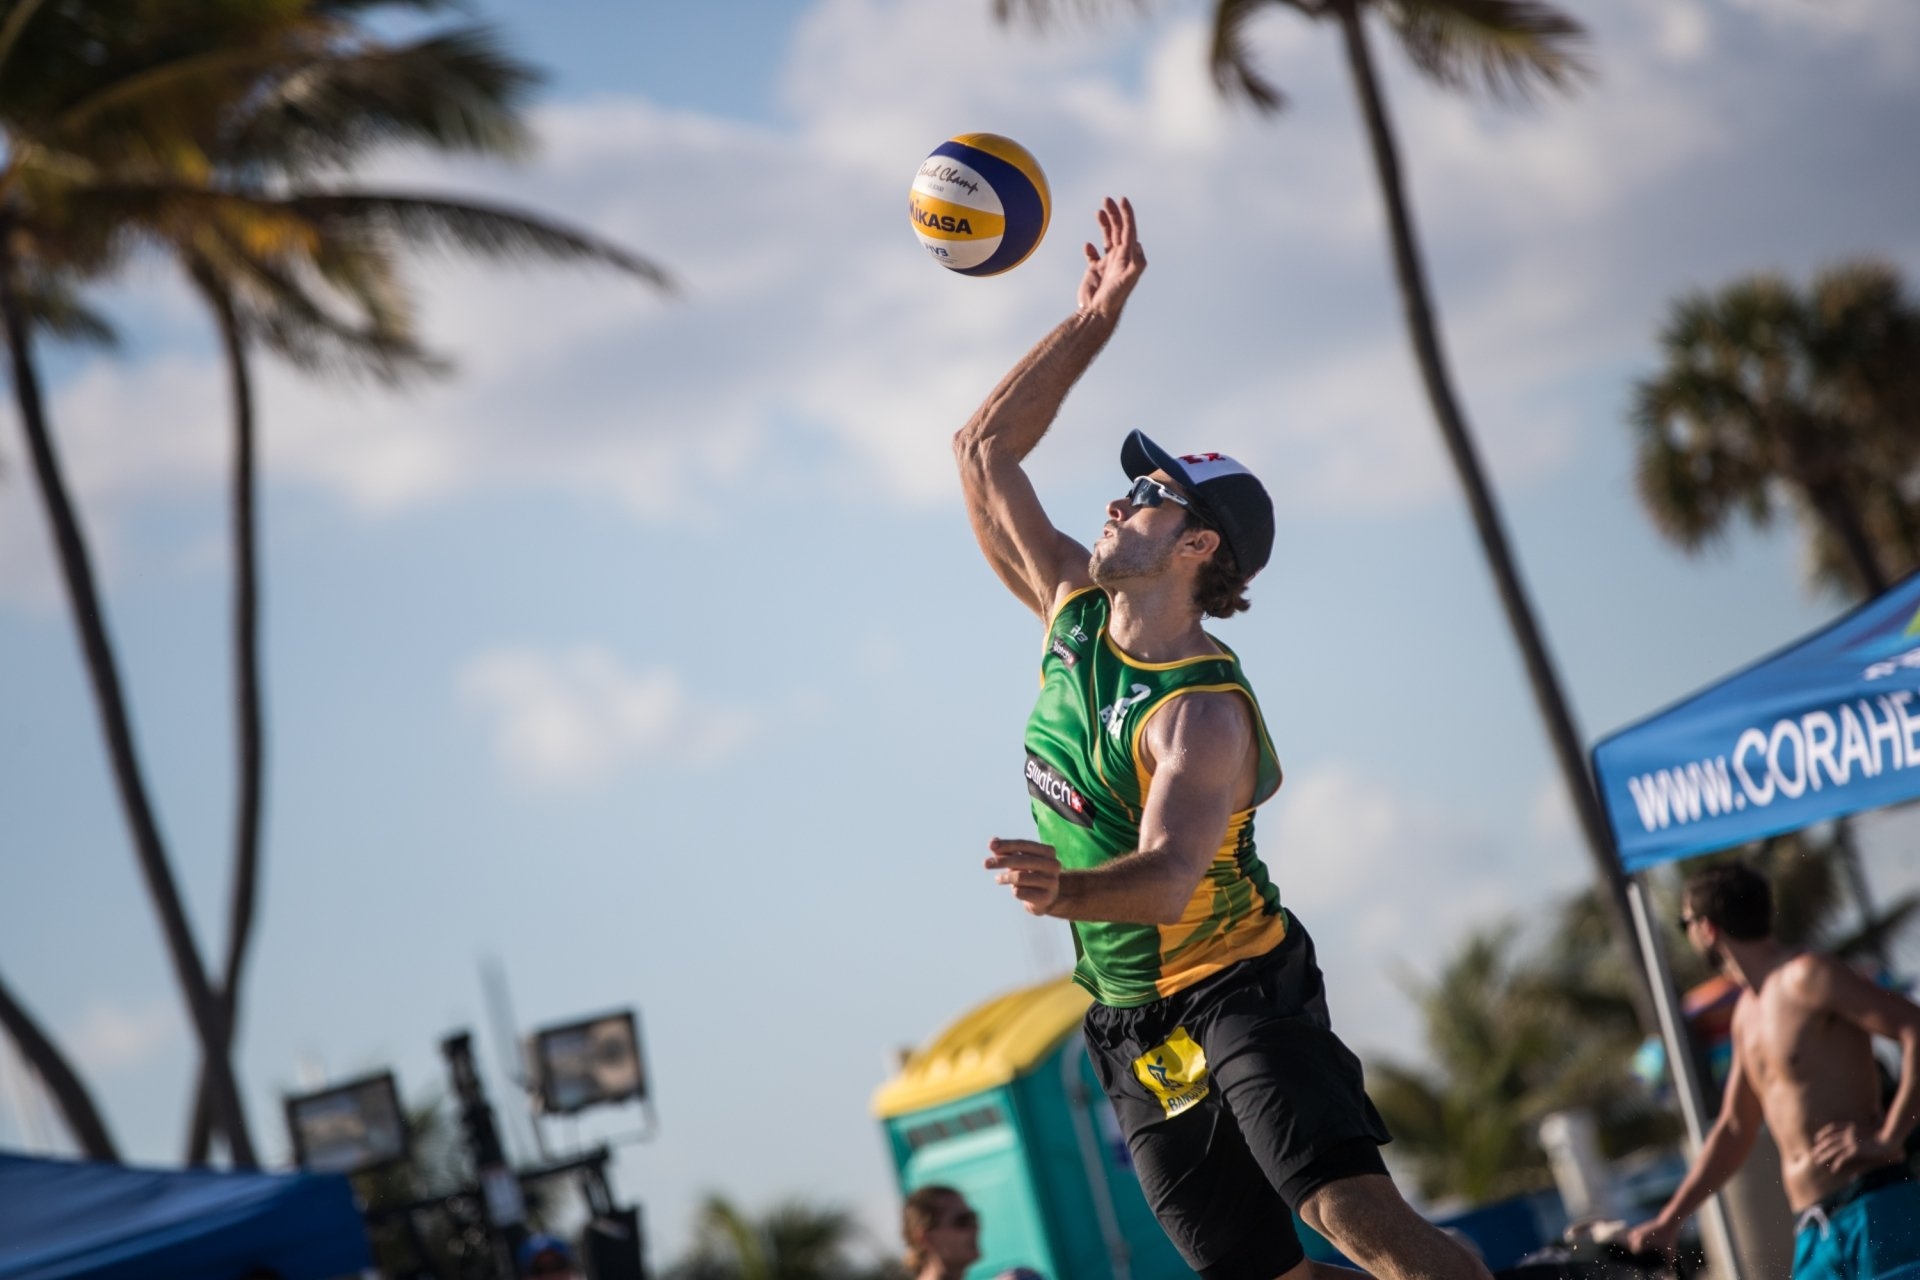 Brazil's Olympic champions Bruno Schmidt and Alison will face a Swiss team on their debut